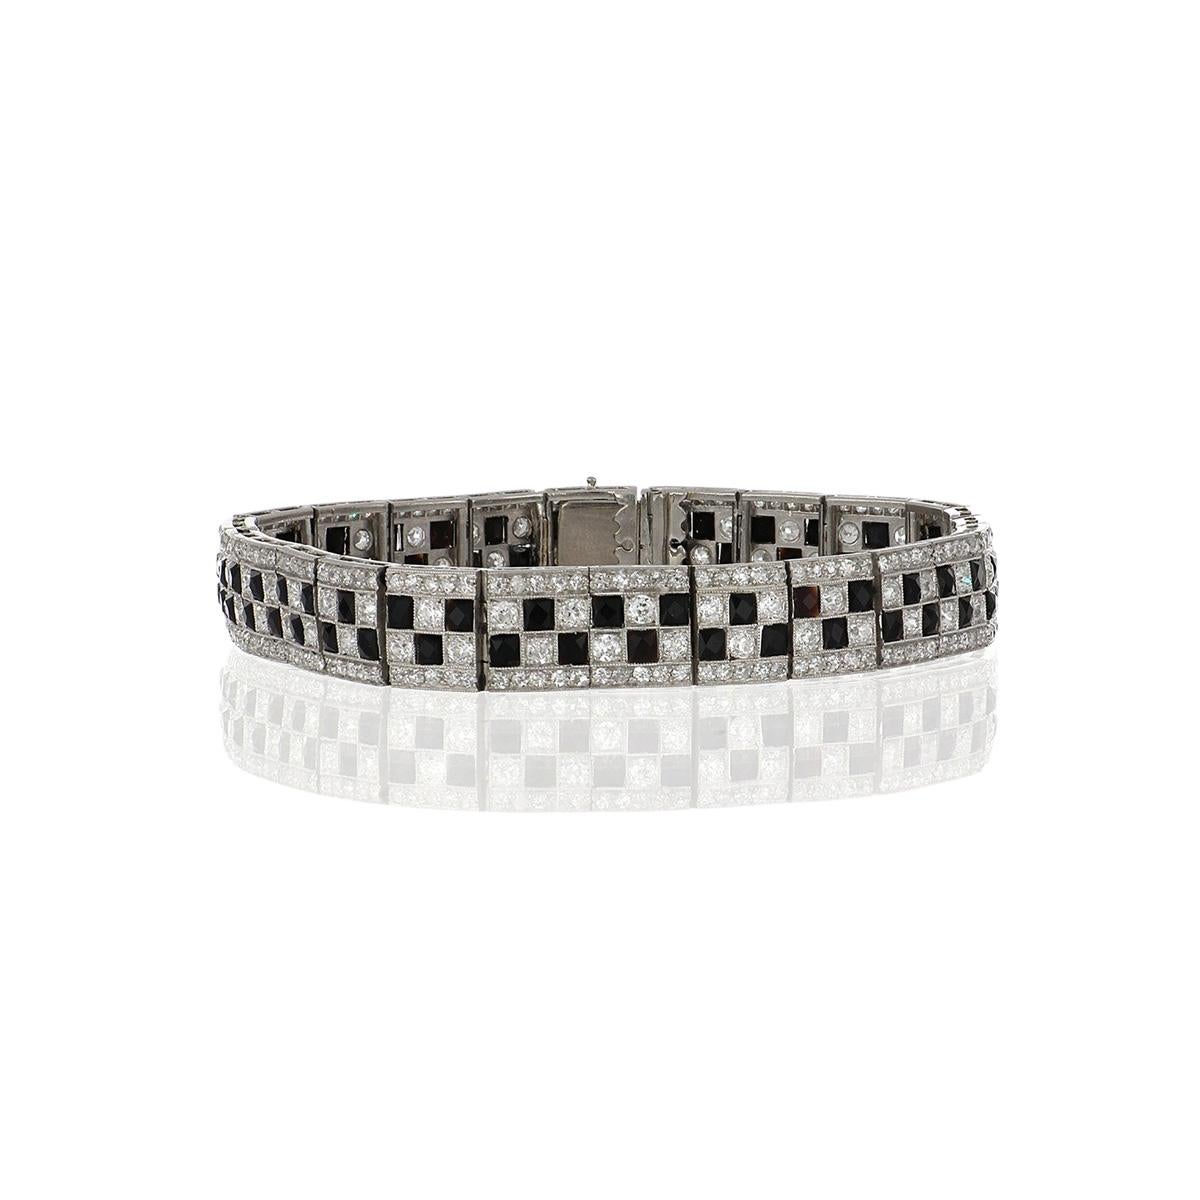 Art Deco platinum line bracelet, set with a checkerboard pattern of diamonds and onyx, with a pavé diamond edge. Circa 1920.  Bracelet contains Old European-cut and single-cut diamonds that total 6.72 carats, H-J color, and VS1-I1 clarity and